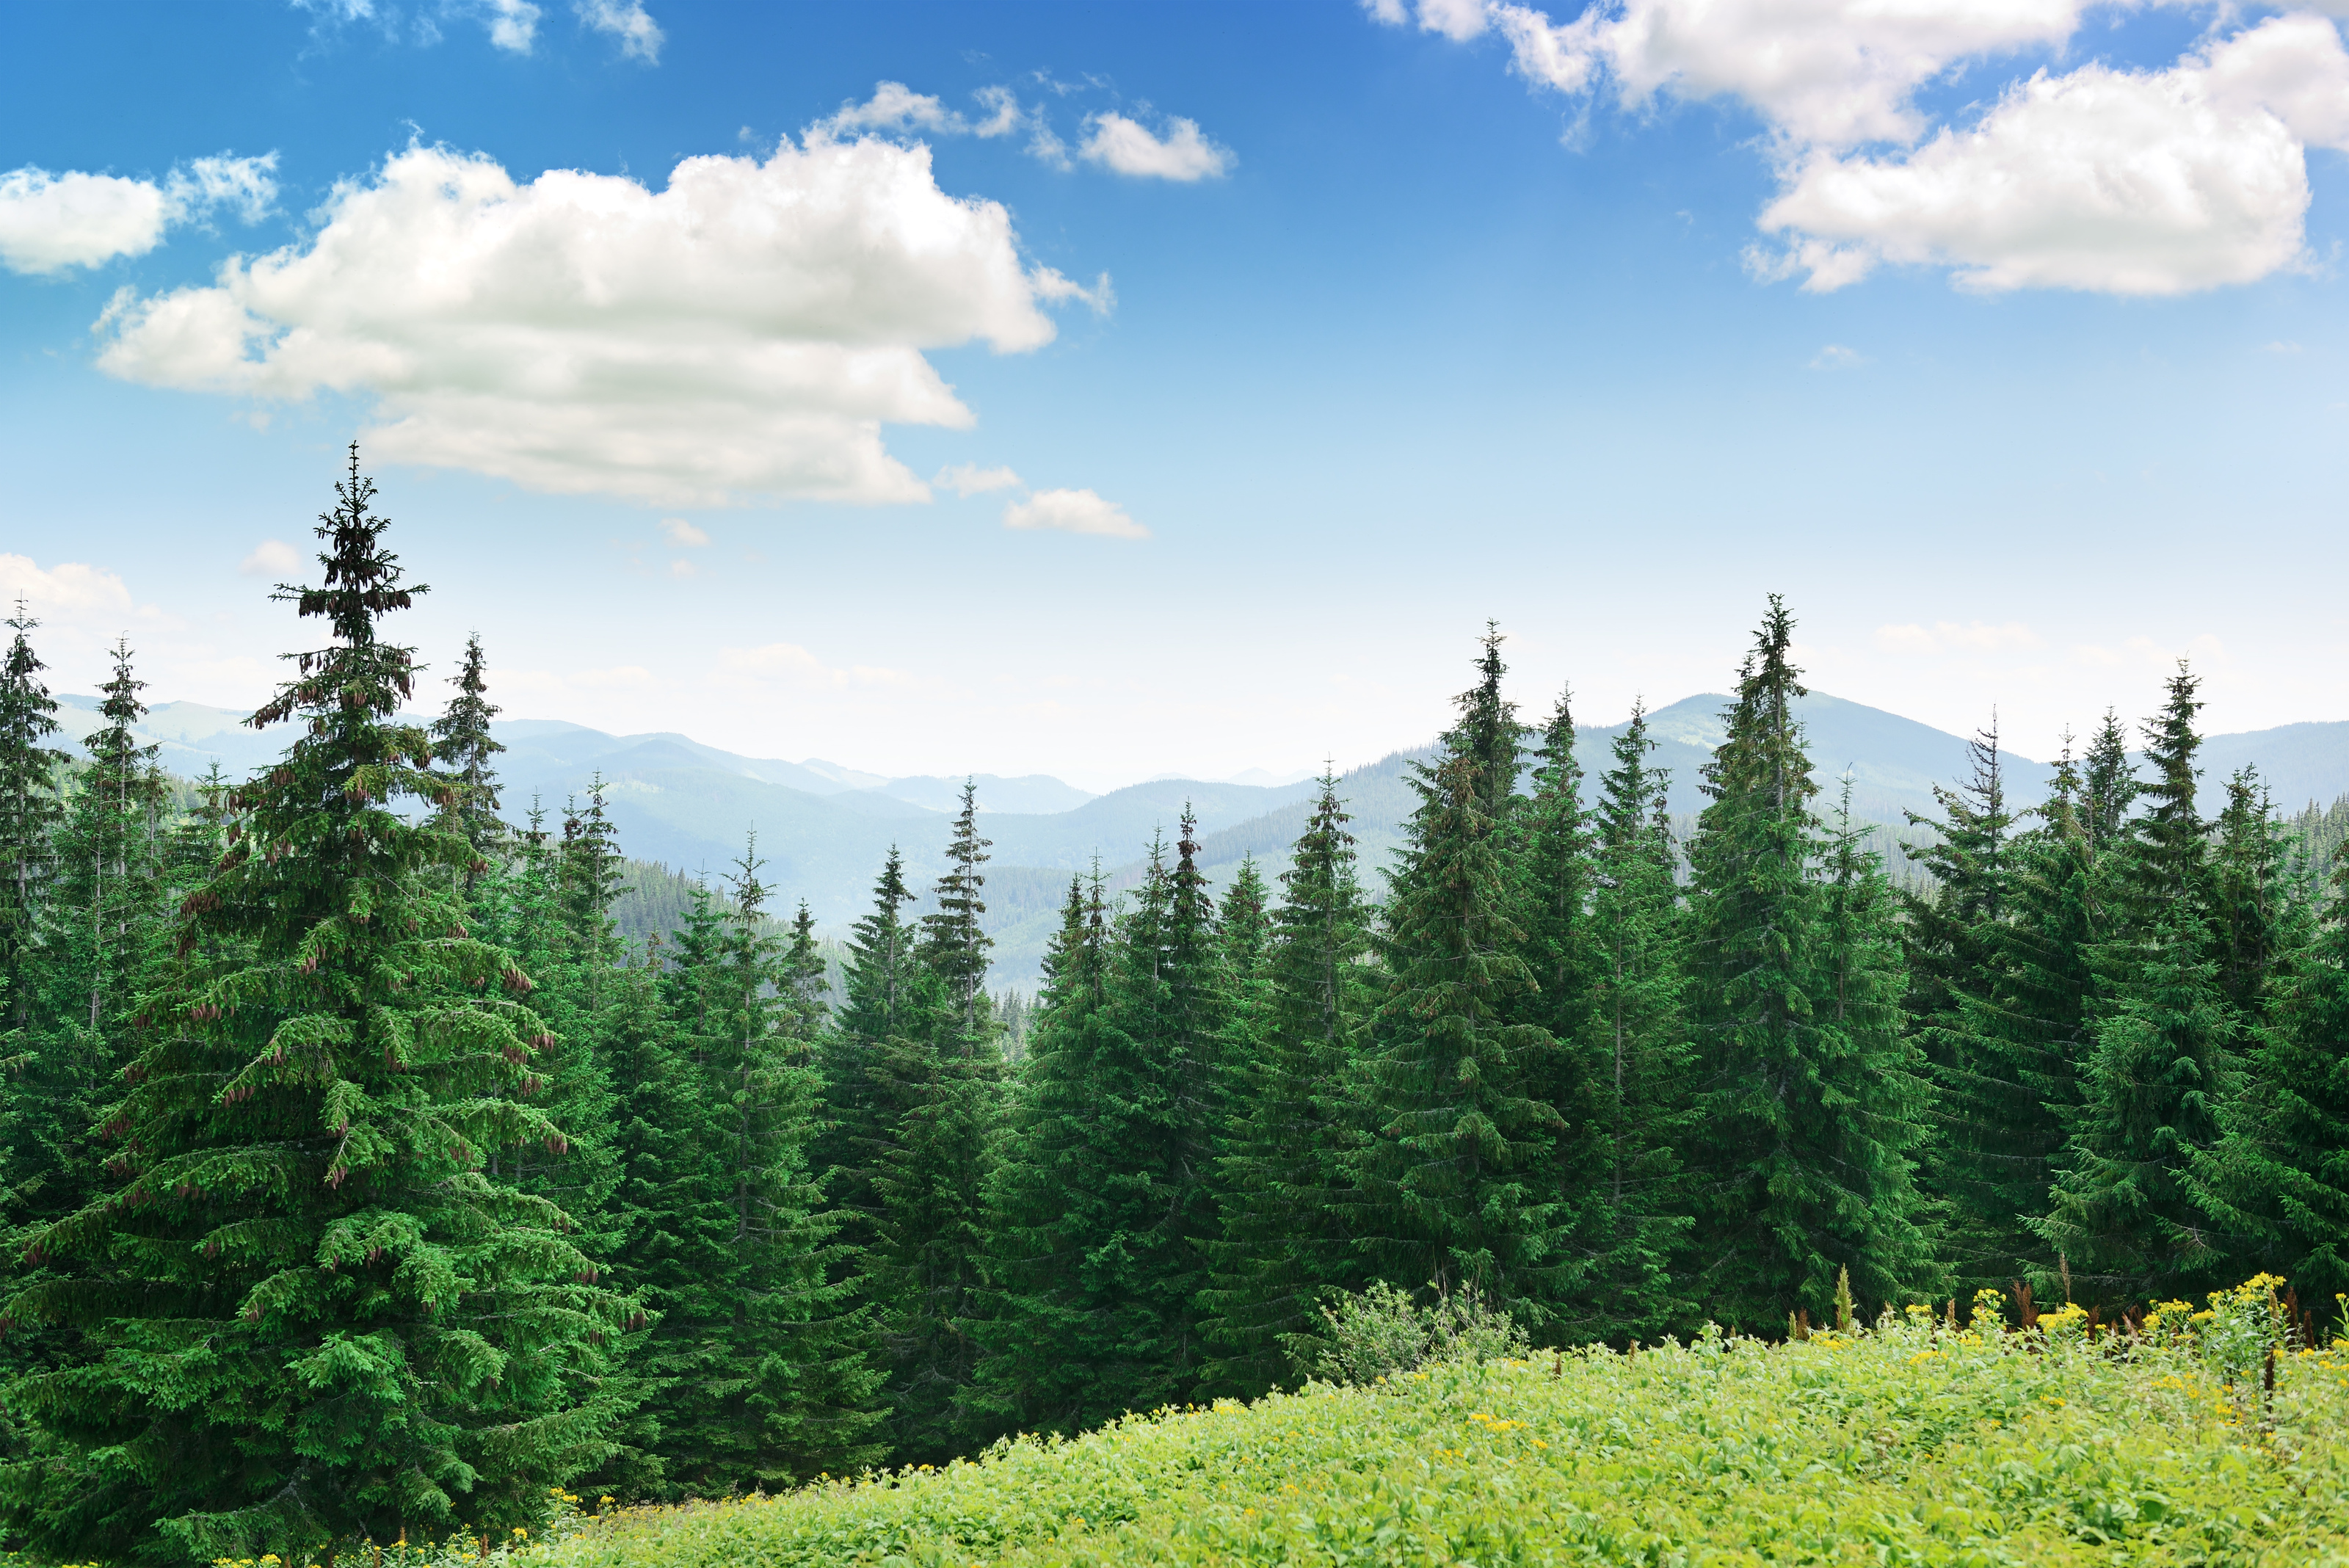 green pine forest background